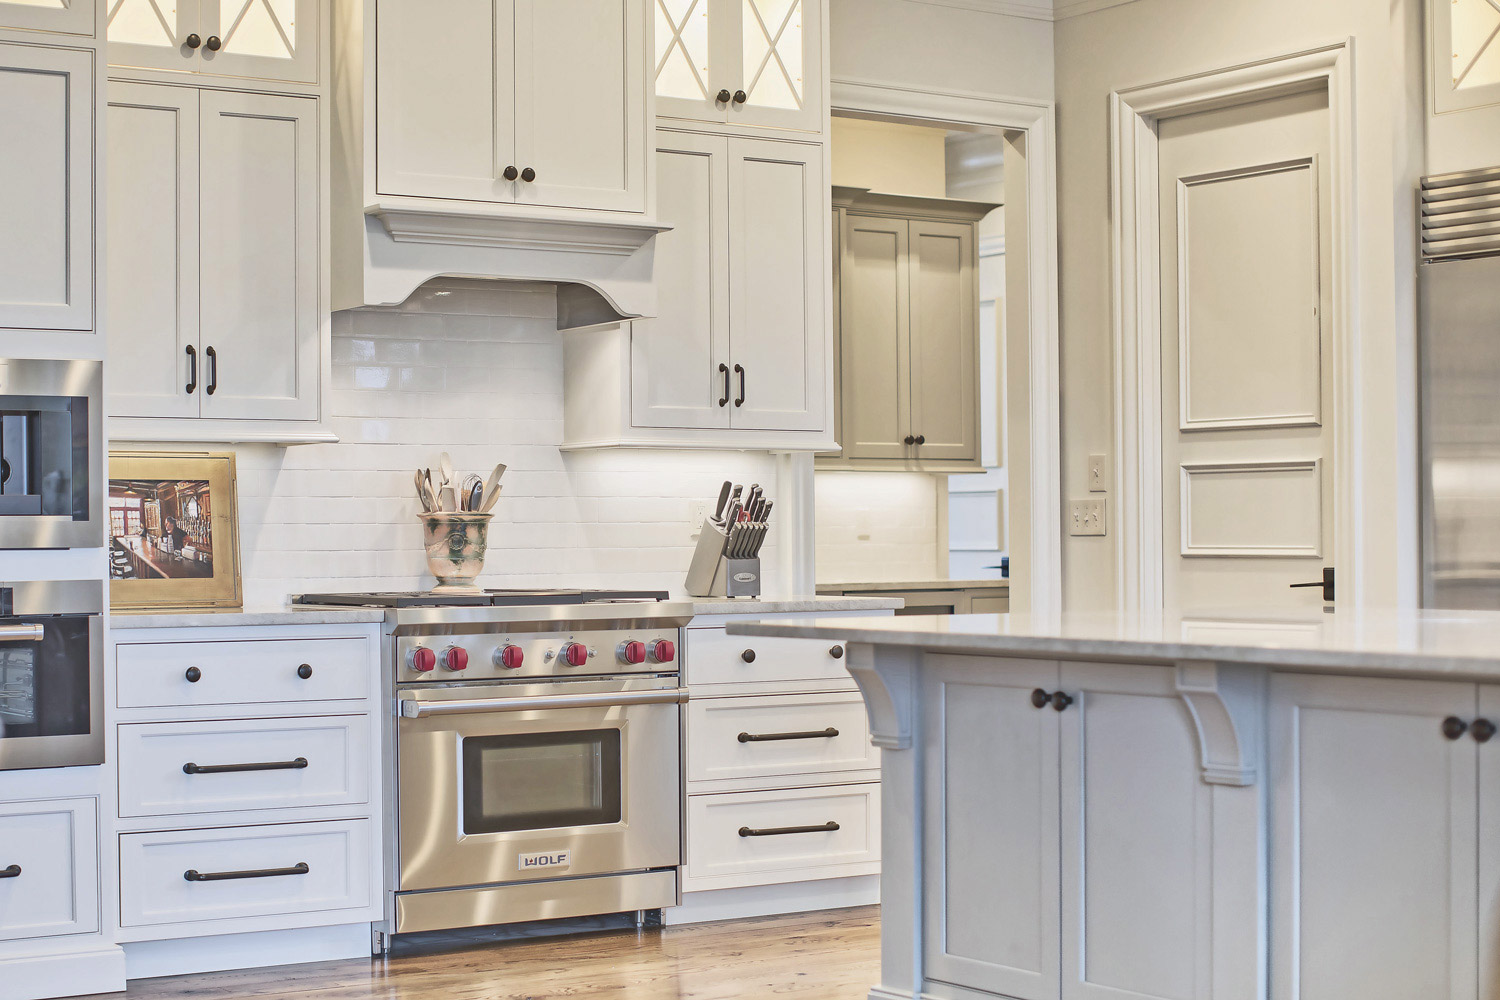 Is a Cooktop and Wall Oven or Range best for Your Kitchen Design? — Toulmin  Kitchen & Bath  Custom Cabinets, Kitchens and Bathroom Design & Remodeling  in Tuscaloosa and Birmingham, Alabama